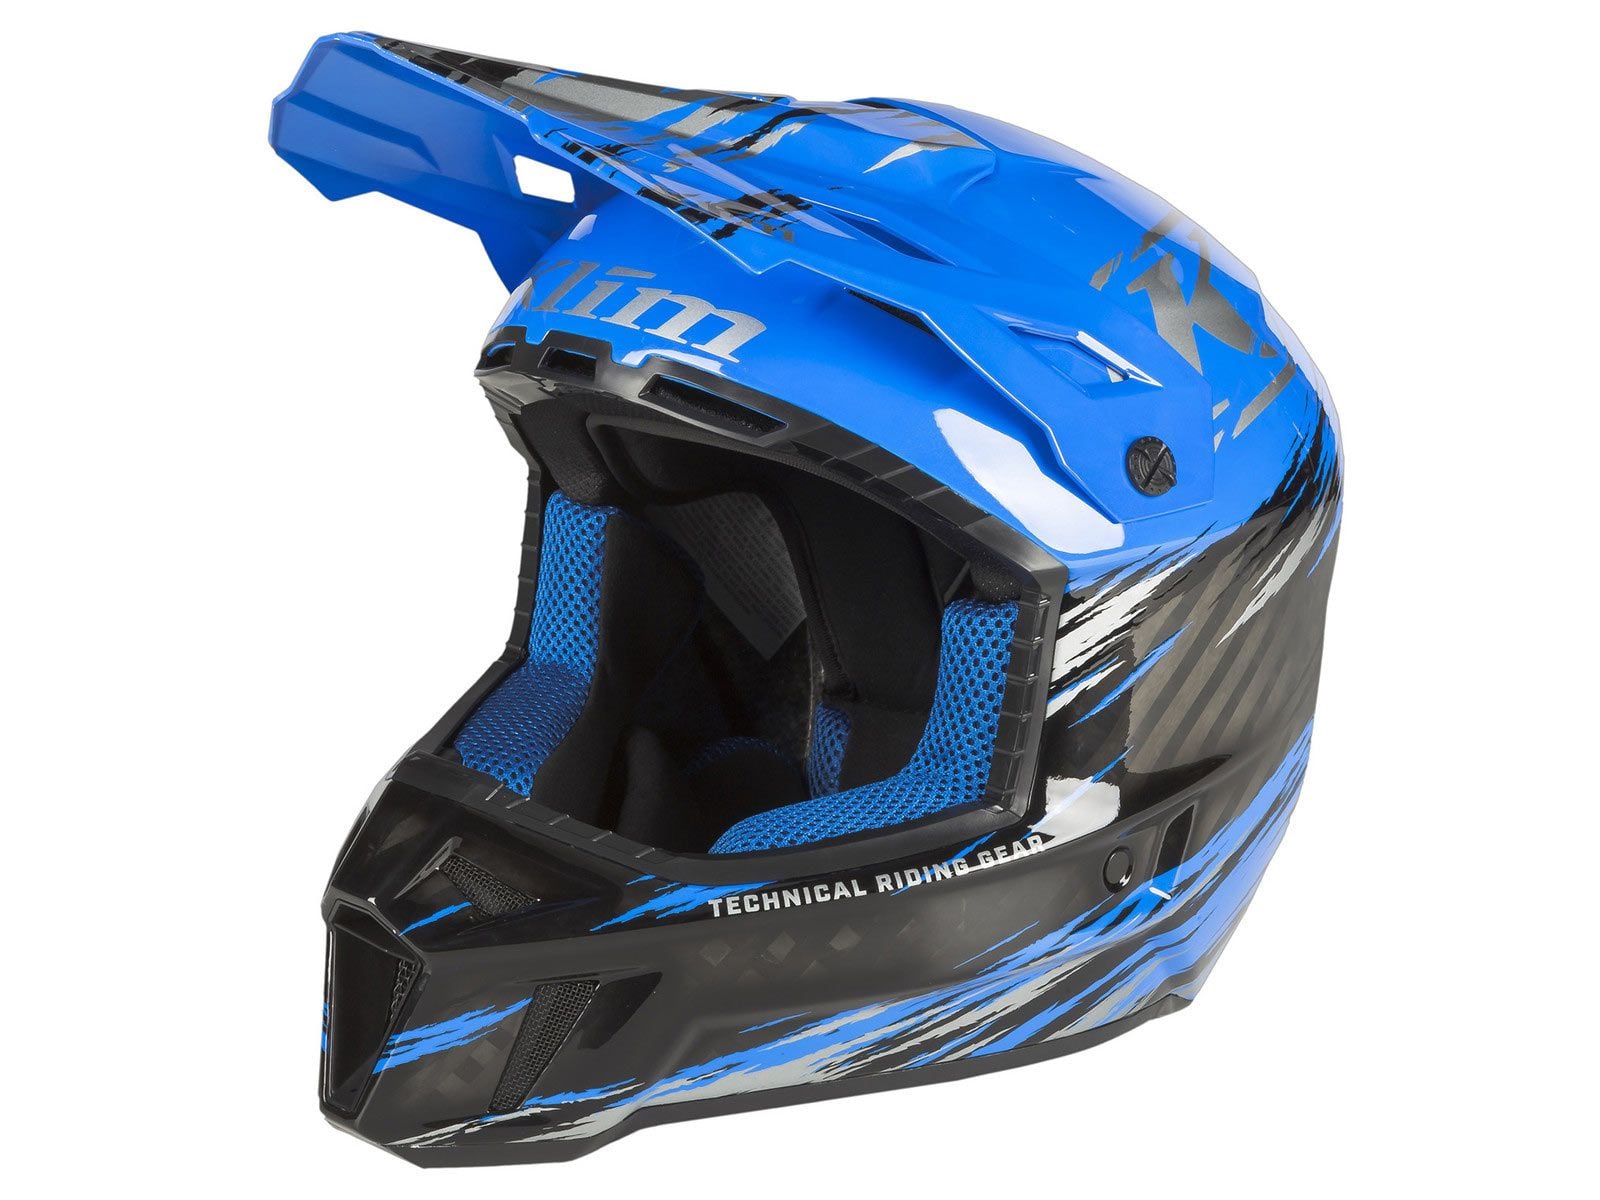 Stay warm this winter with superior protection in this lightweight helmet.